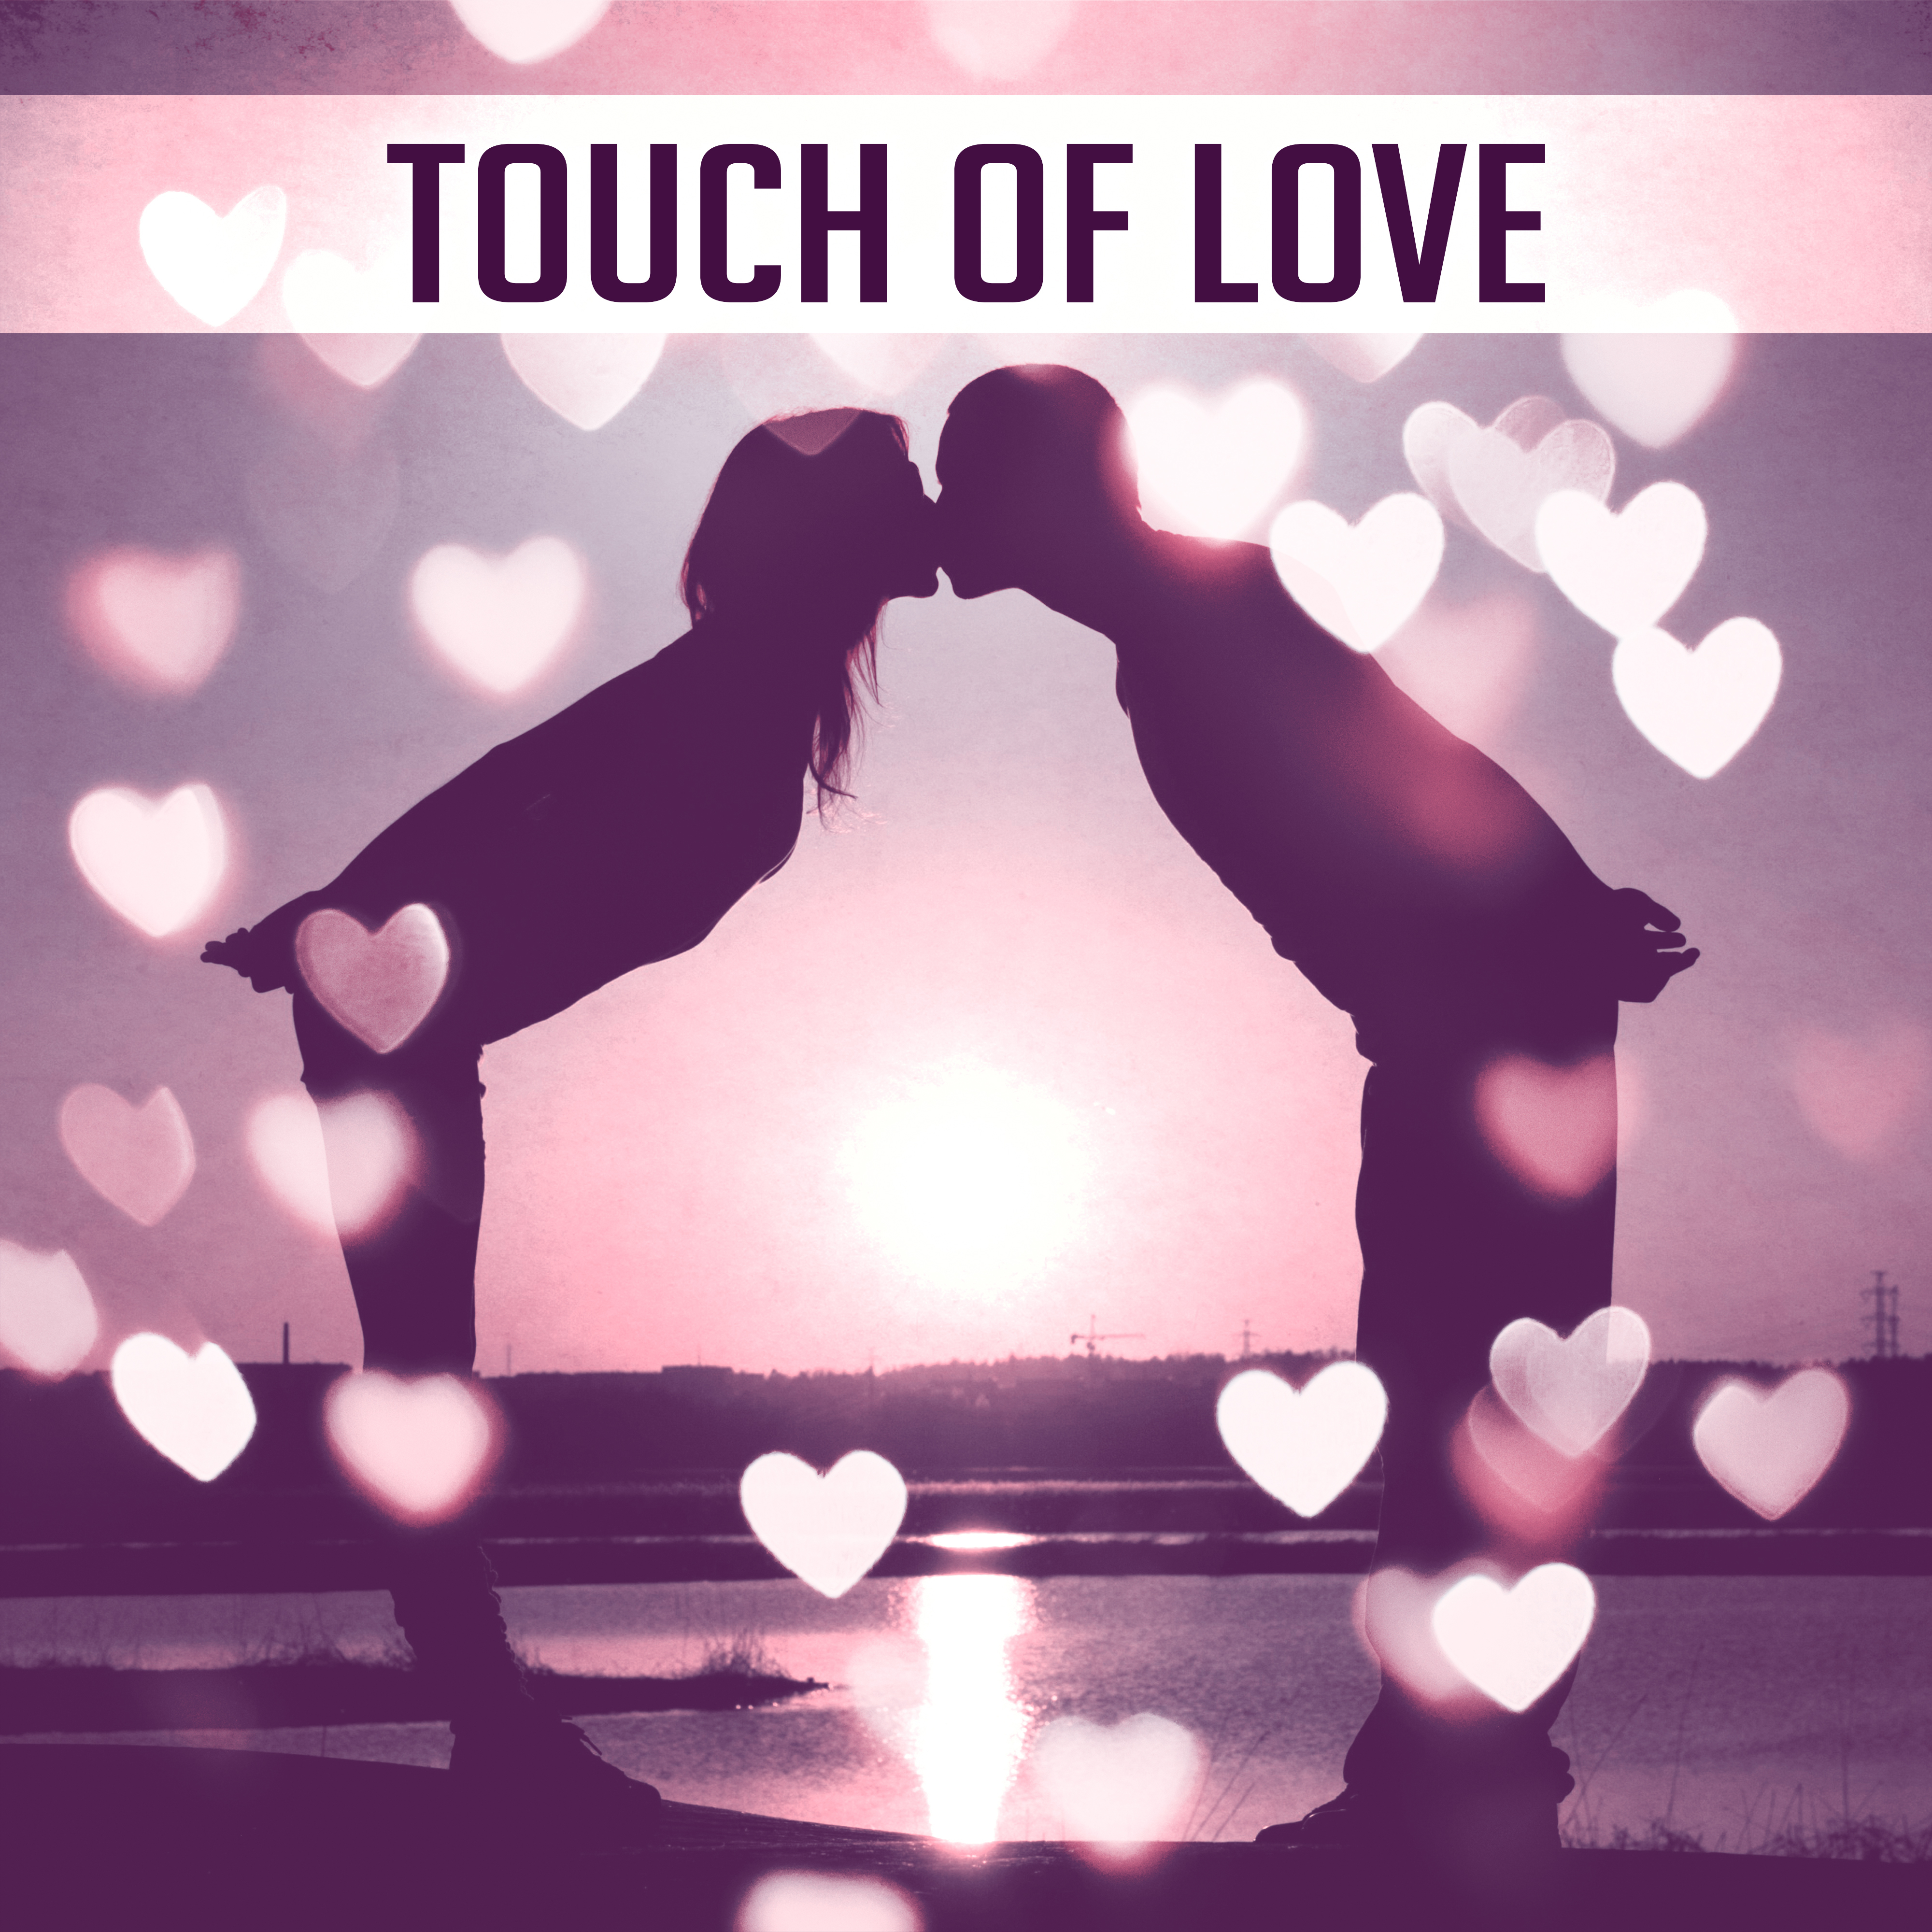 Touch of Love – Sensual Jazz Music, Romantic Time for Two, Real Feeling, Erotic Dance, **** Jazz, Dinner by Candlelight